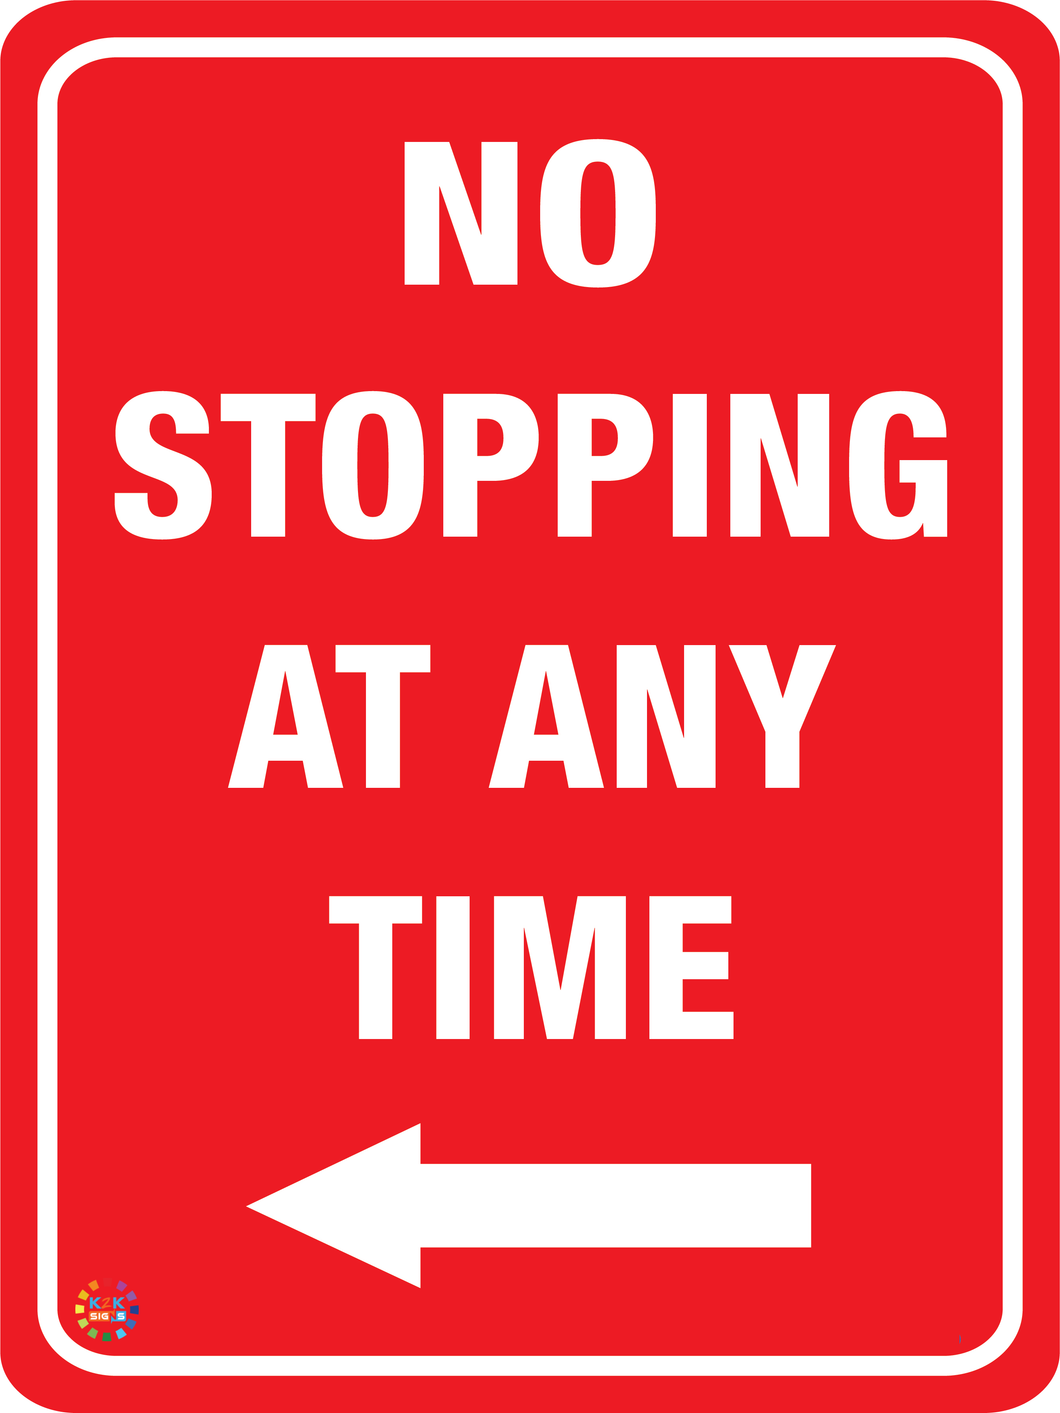 No Stopping Any Time (Left Arrow) Sign